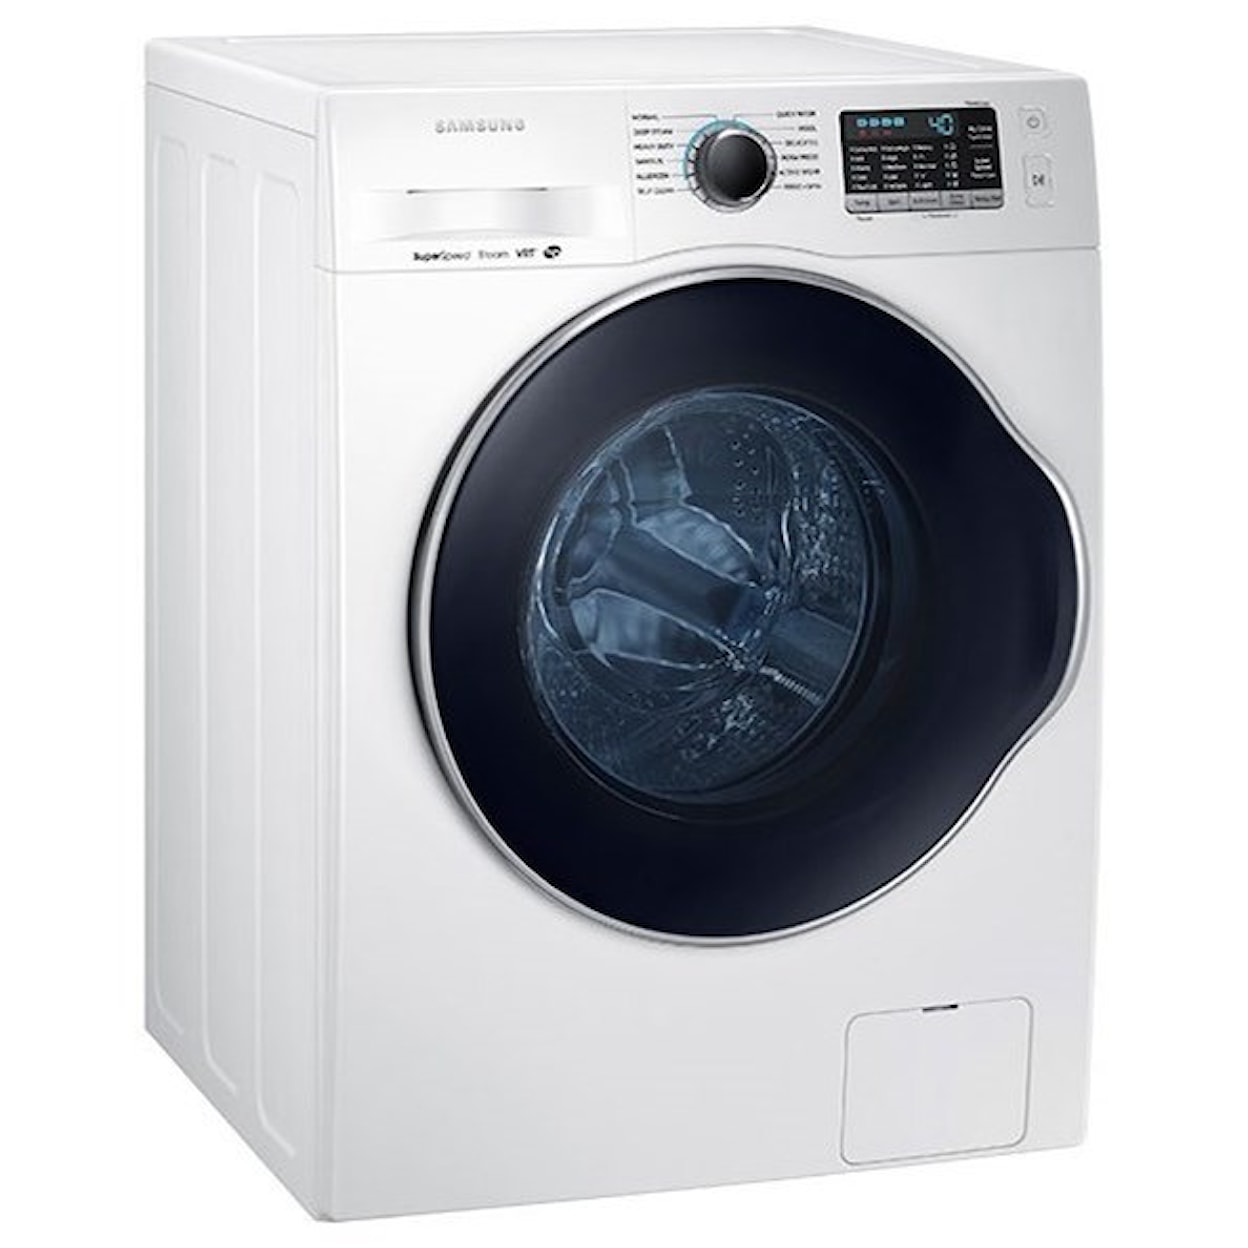 Samsung Appliances Front Load Washers - Samsung WW6800 2.2 cu. ft. Front Load Washer